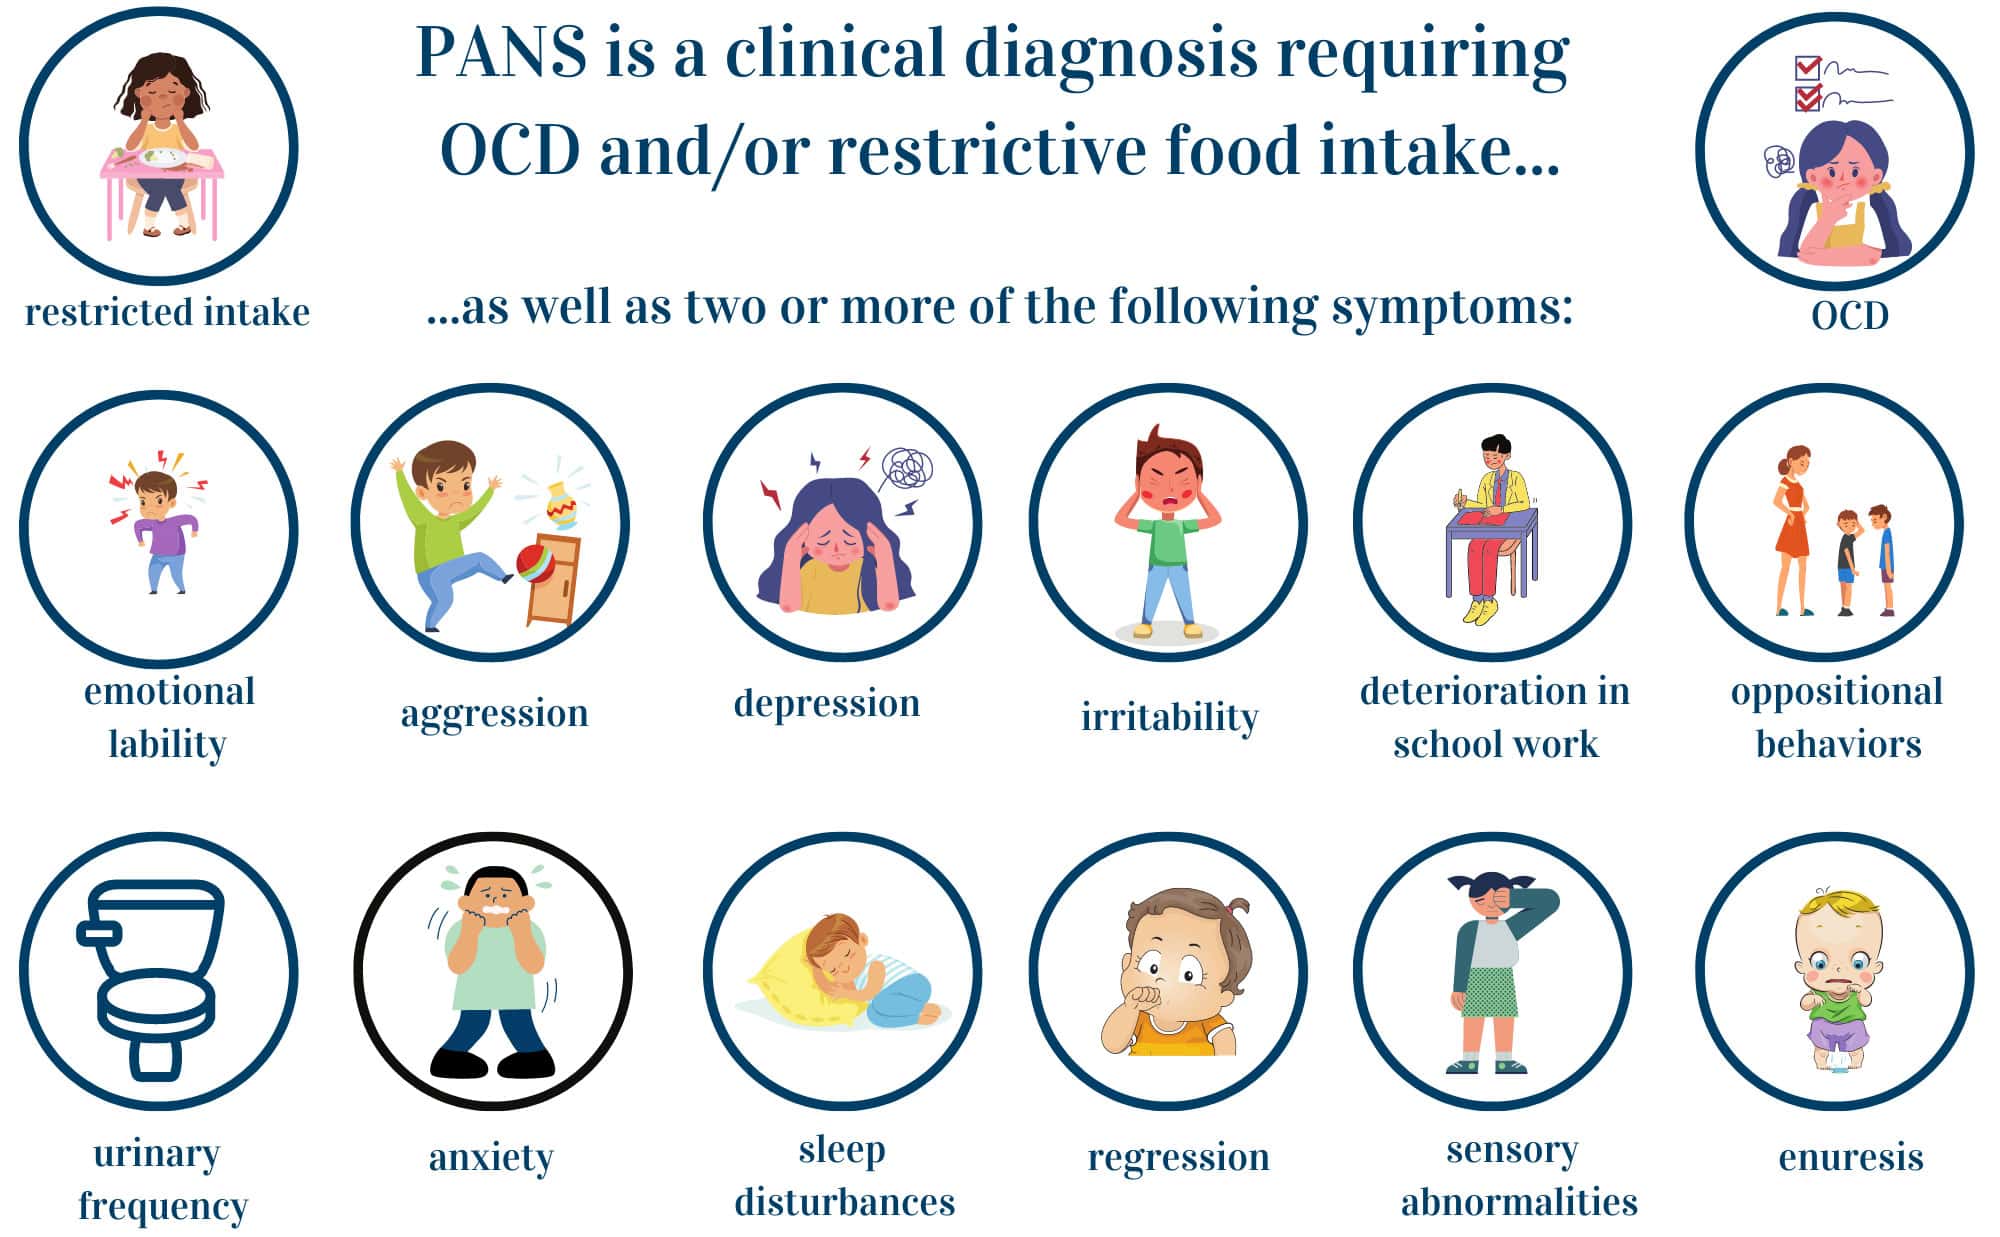 PANS is a clinical diagnosis requiring OCD and/or restrictive food intake, as well as two or more of the following symptoms: emotional lability, aggression, depression, irritability, deterioration in schoolwork, oppositional behaviors, urinary frequency, anxiety, sleep disturbances, regression, sensory abnormalities, and enuresis.